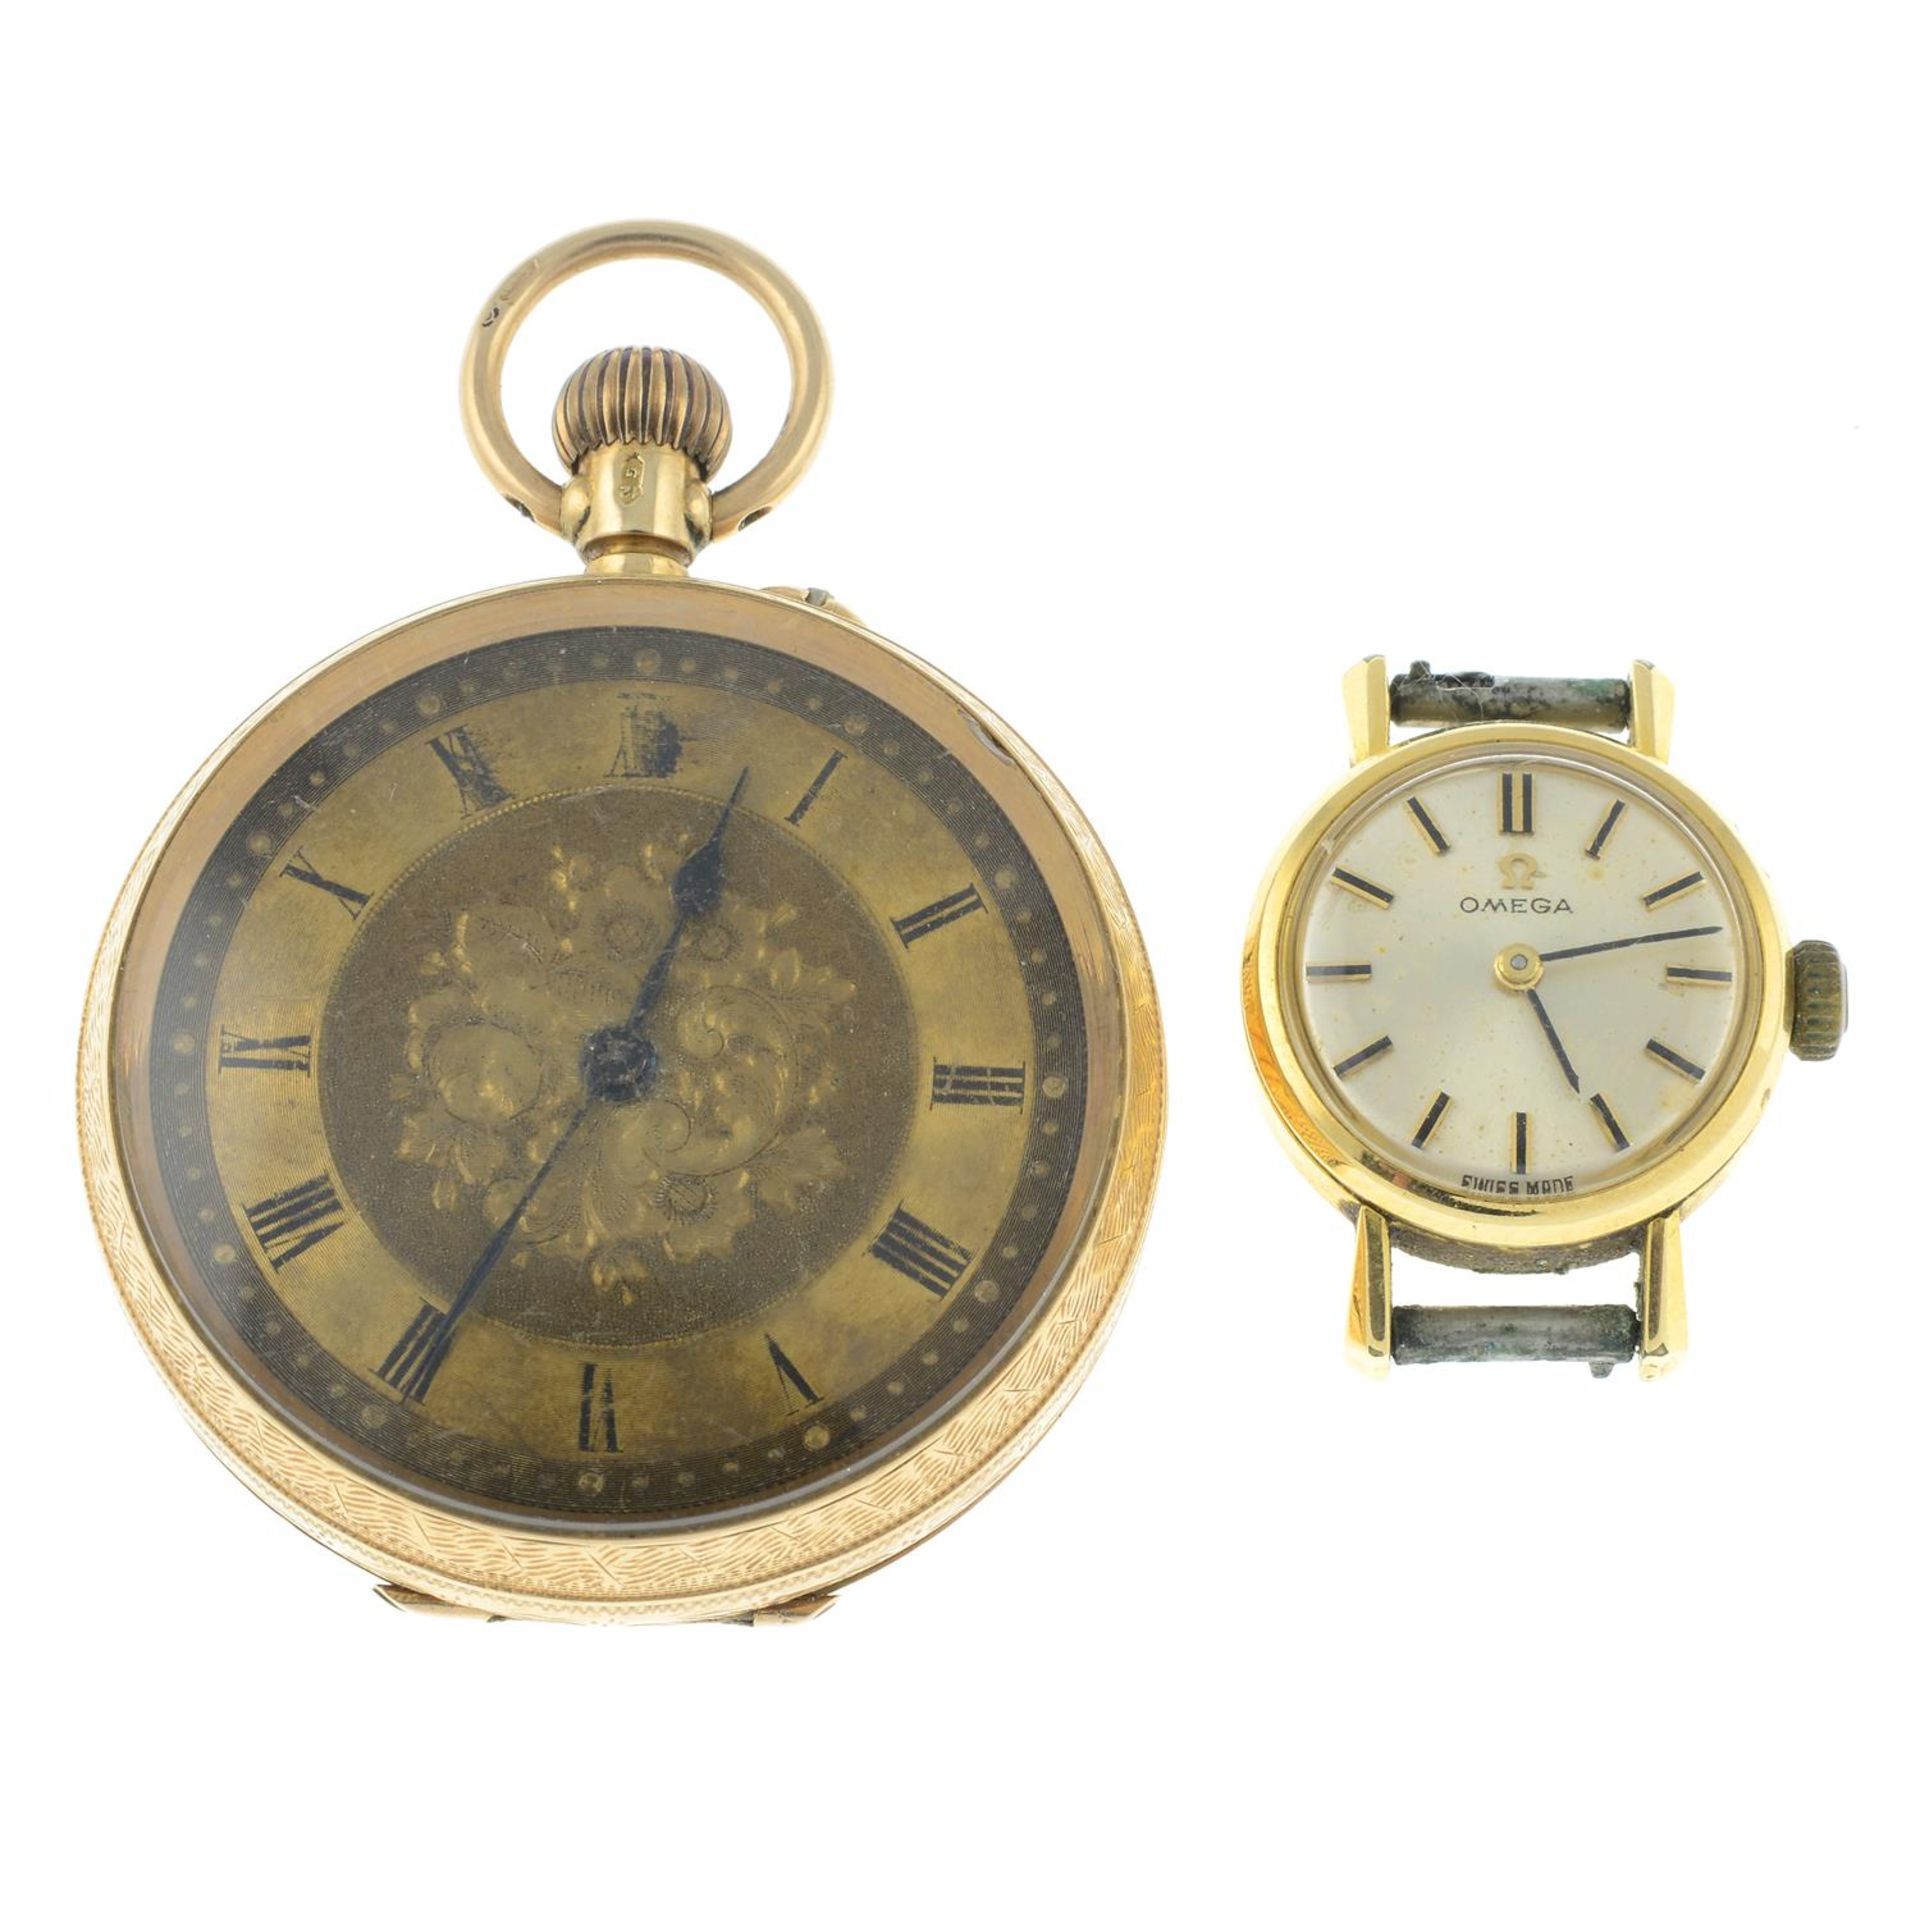 A lady's watch head, by Omega and an early 20th century 12ct gold pocket watch.